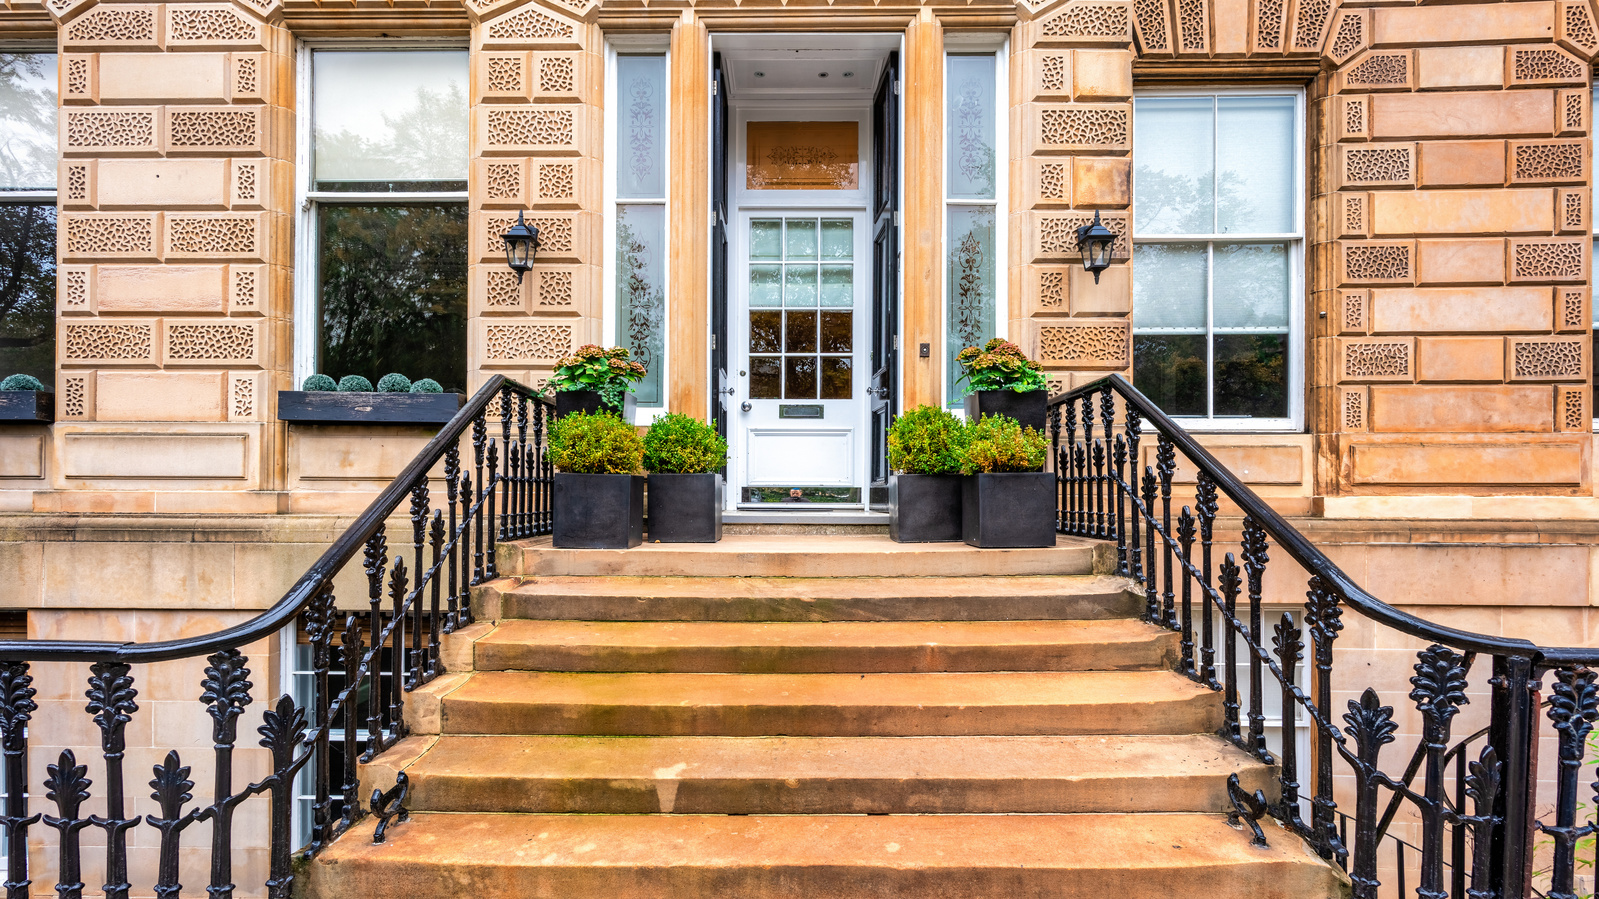 Exterior entrance for Scotland Interior Property - Photography by Nate Cleary